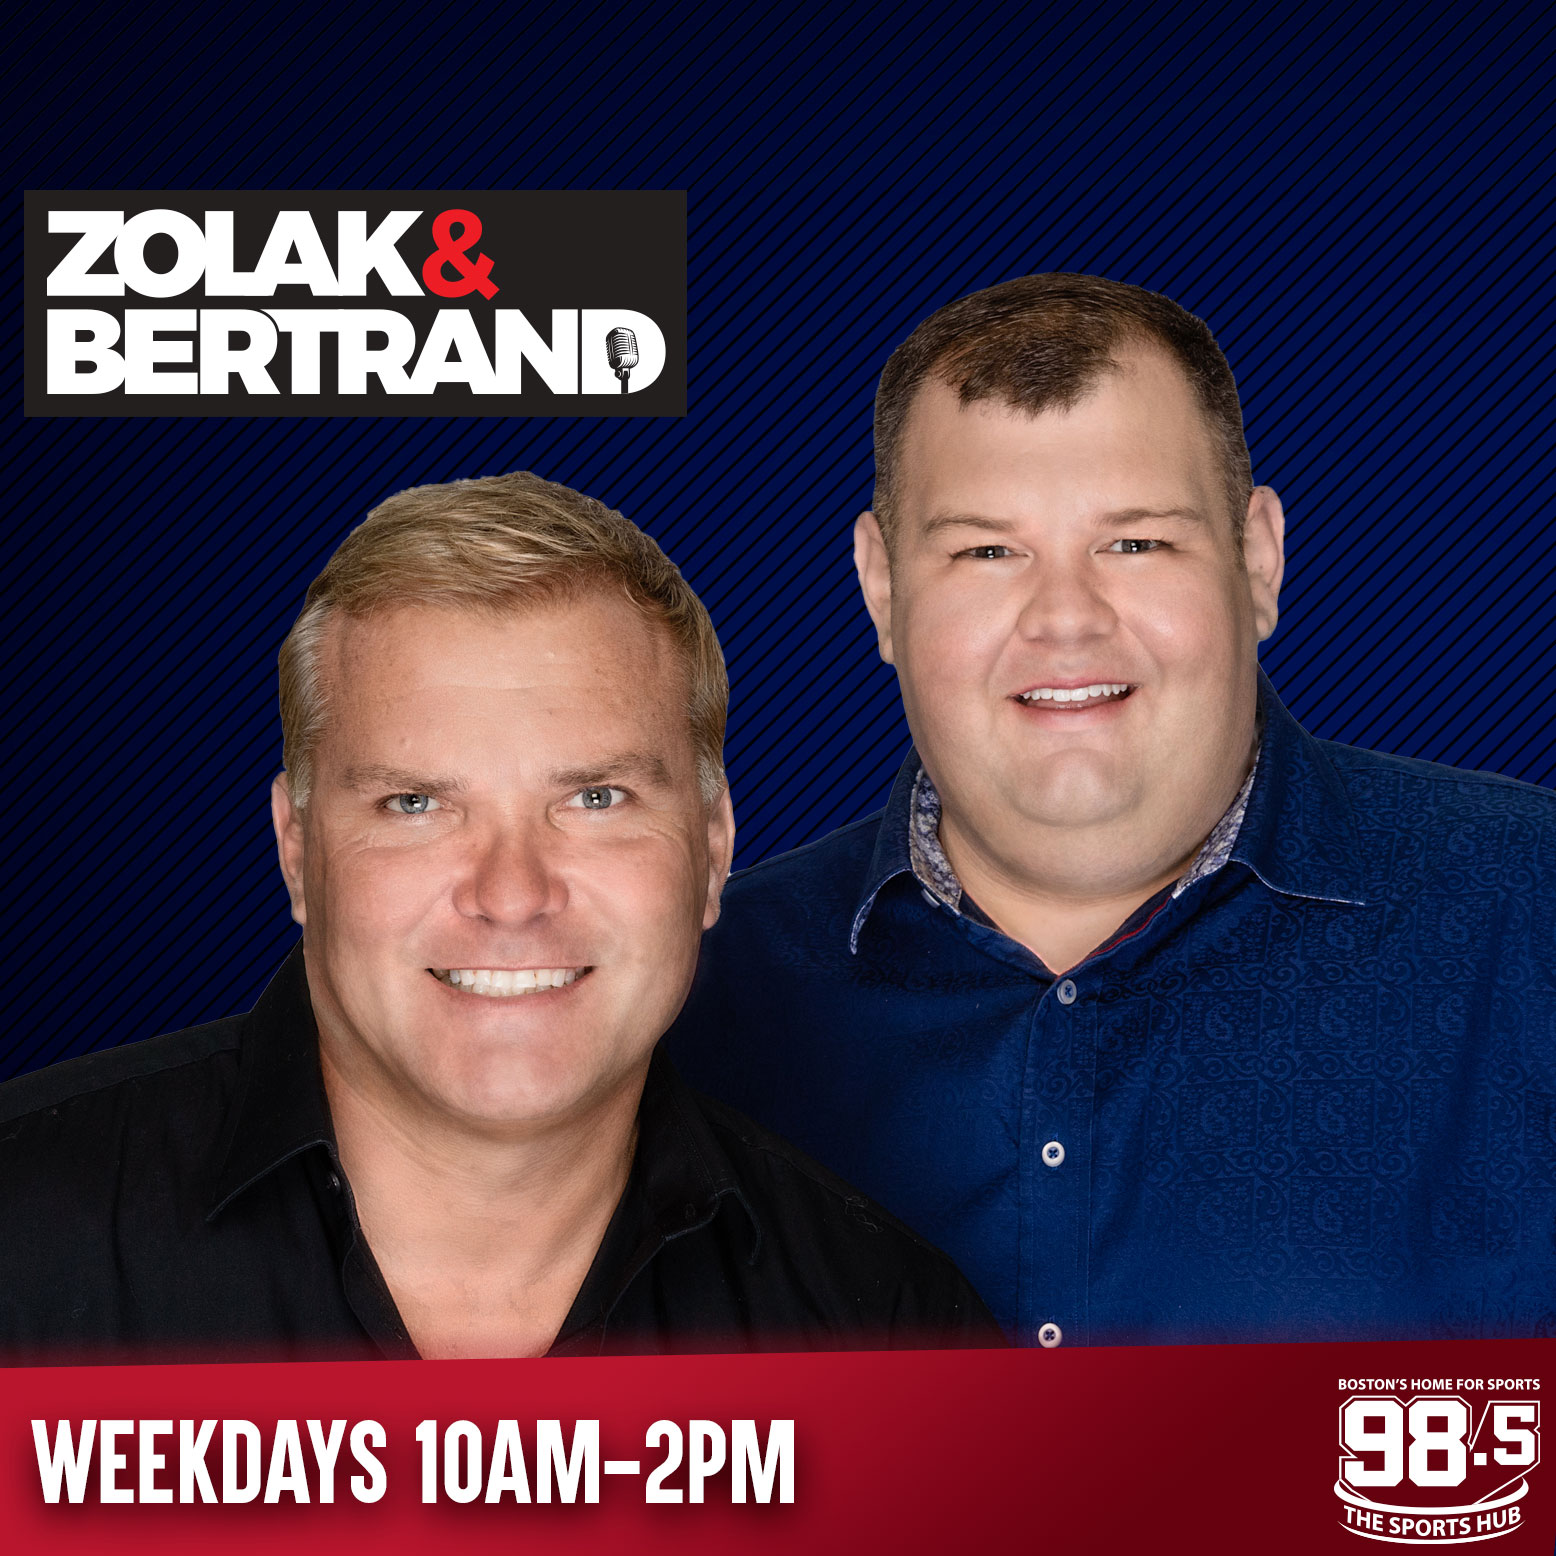 Scott Zolak: OT is the most "chaotic" position on the Patriots